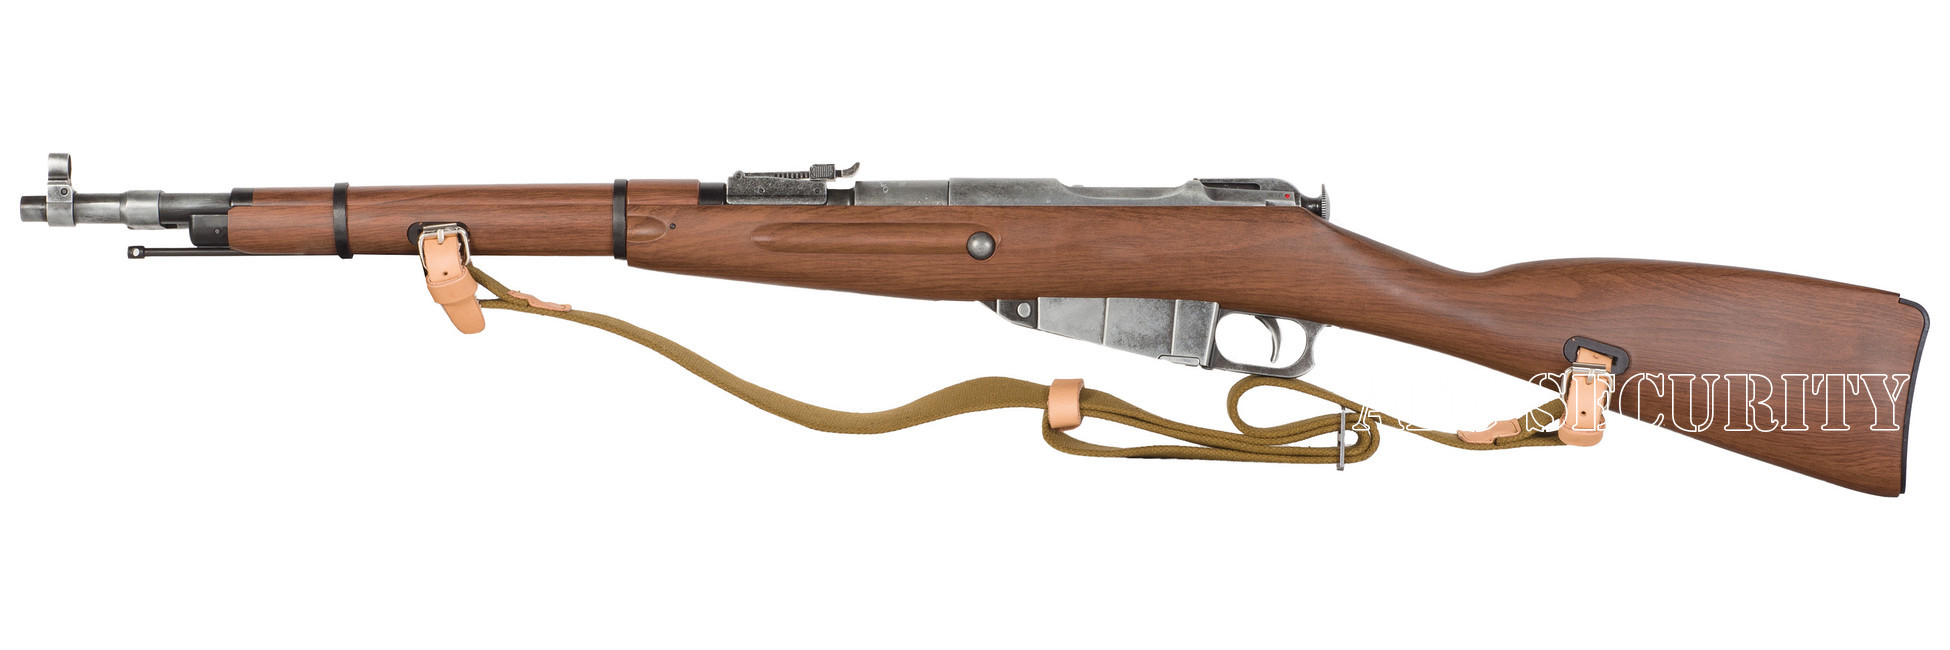 how much does a mosin nagant cost